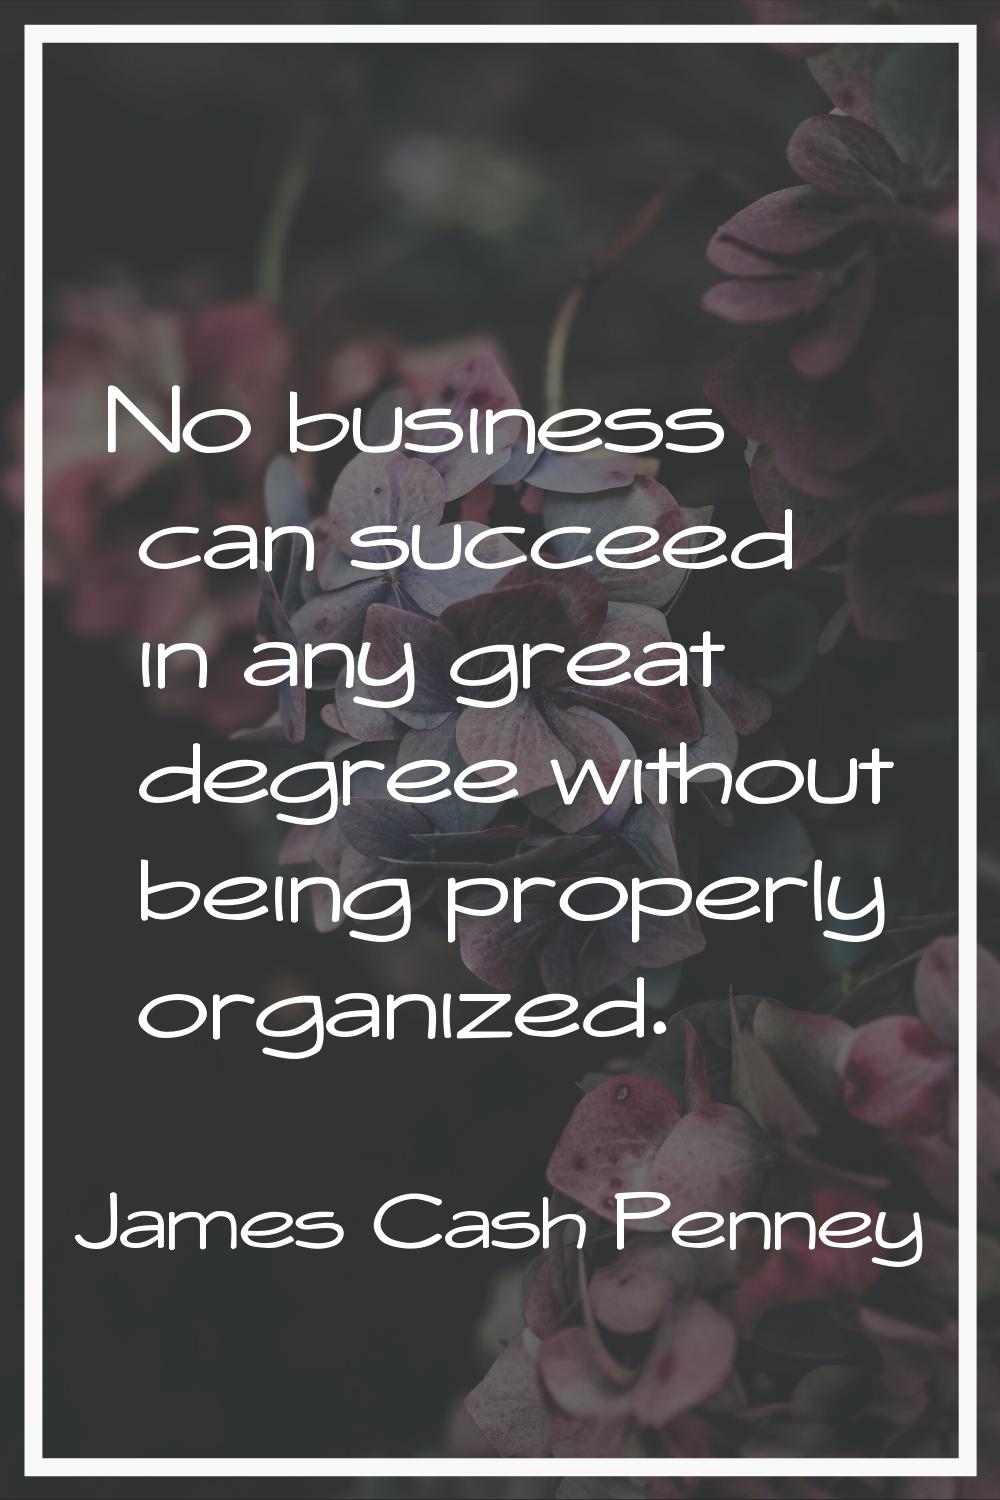 No business can succeed in any great degree without being properly organized.